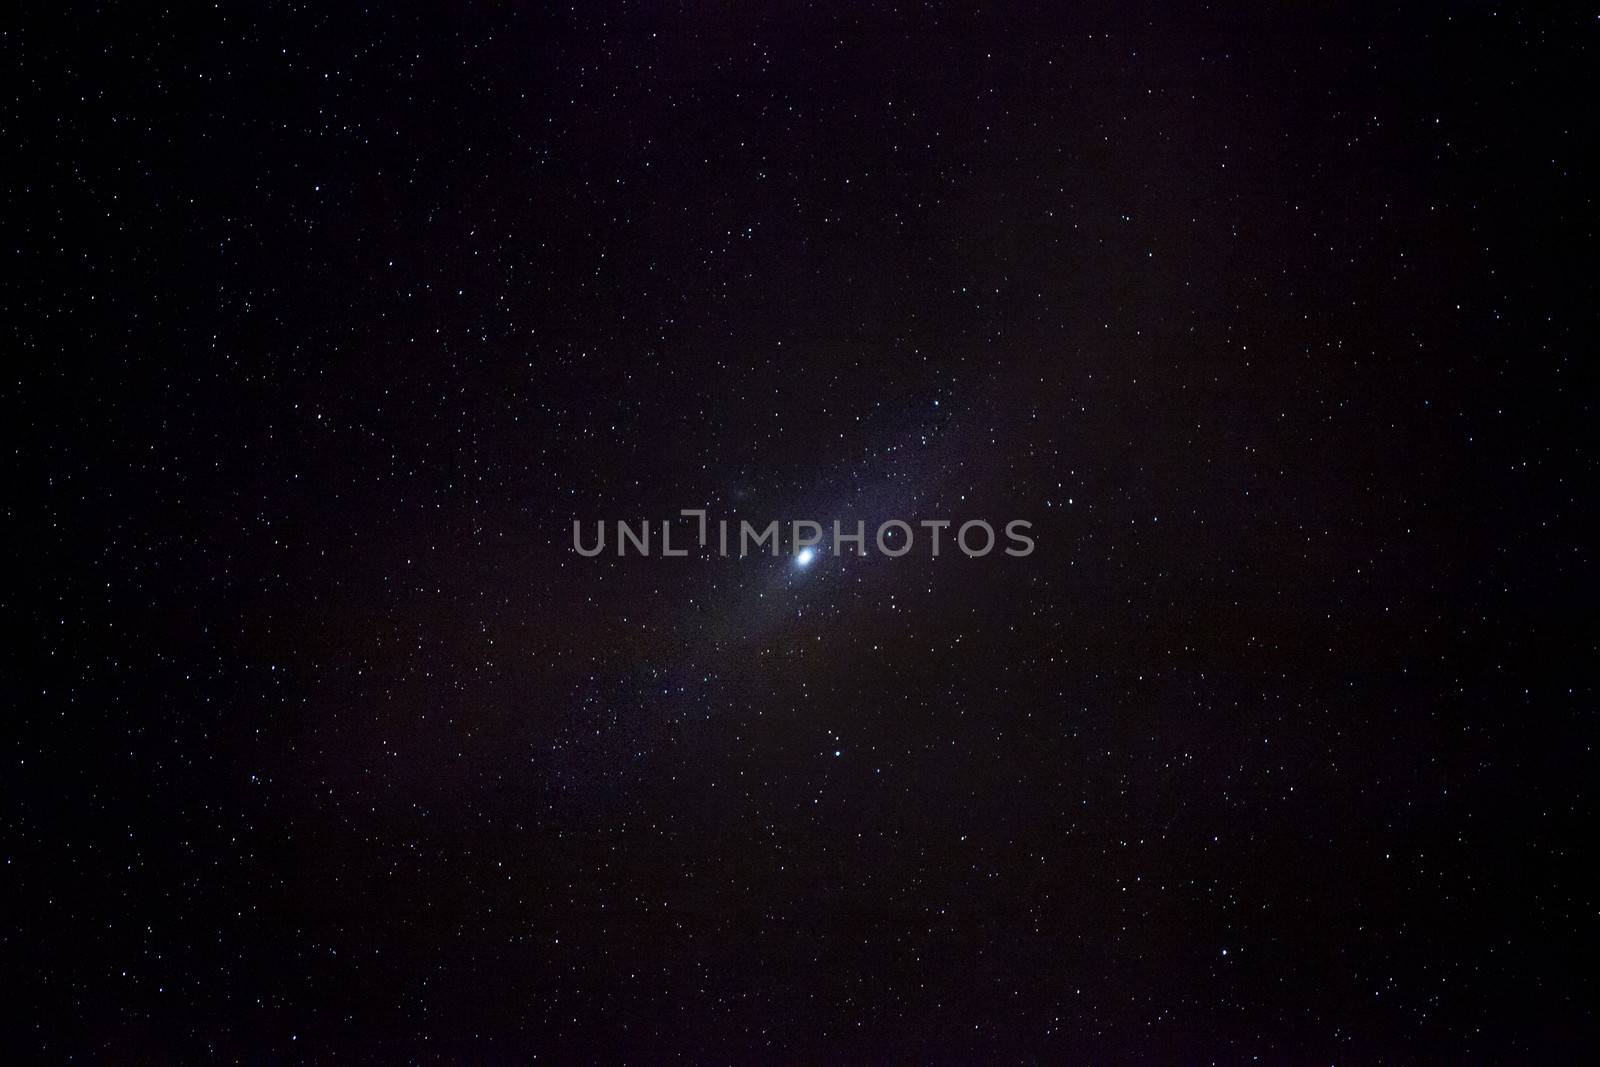 The M31 Andromeda Galazy as seen by a 200mm lens